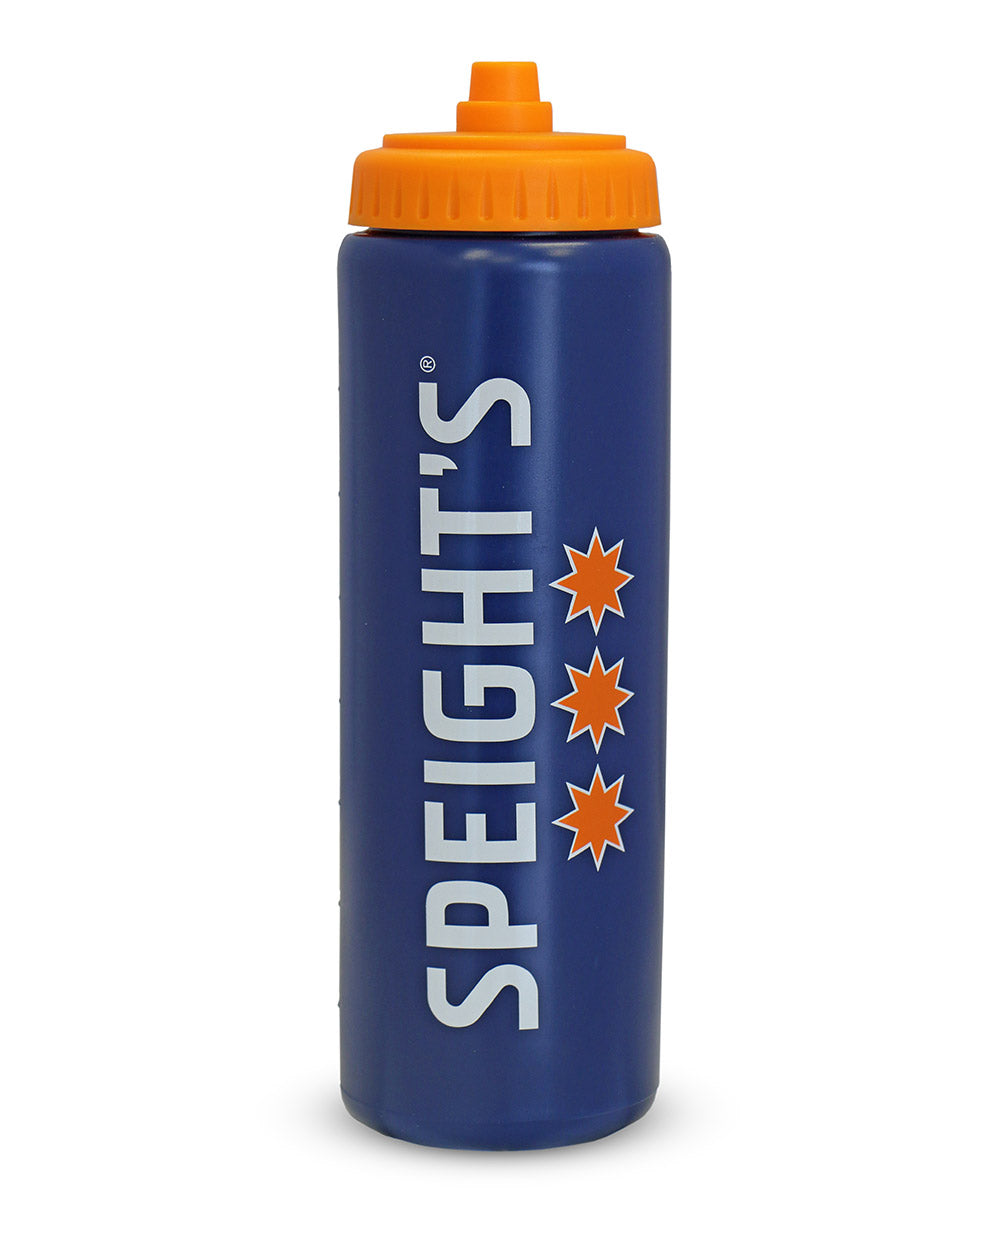 Speight's Sipper Drink Bottle -  Beer Gear Apparel & Merchandise - Speights - Lion Red - VB - Tokyo Dy merch